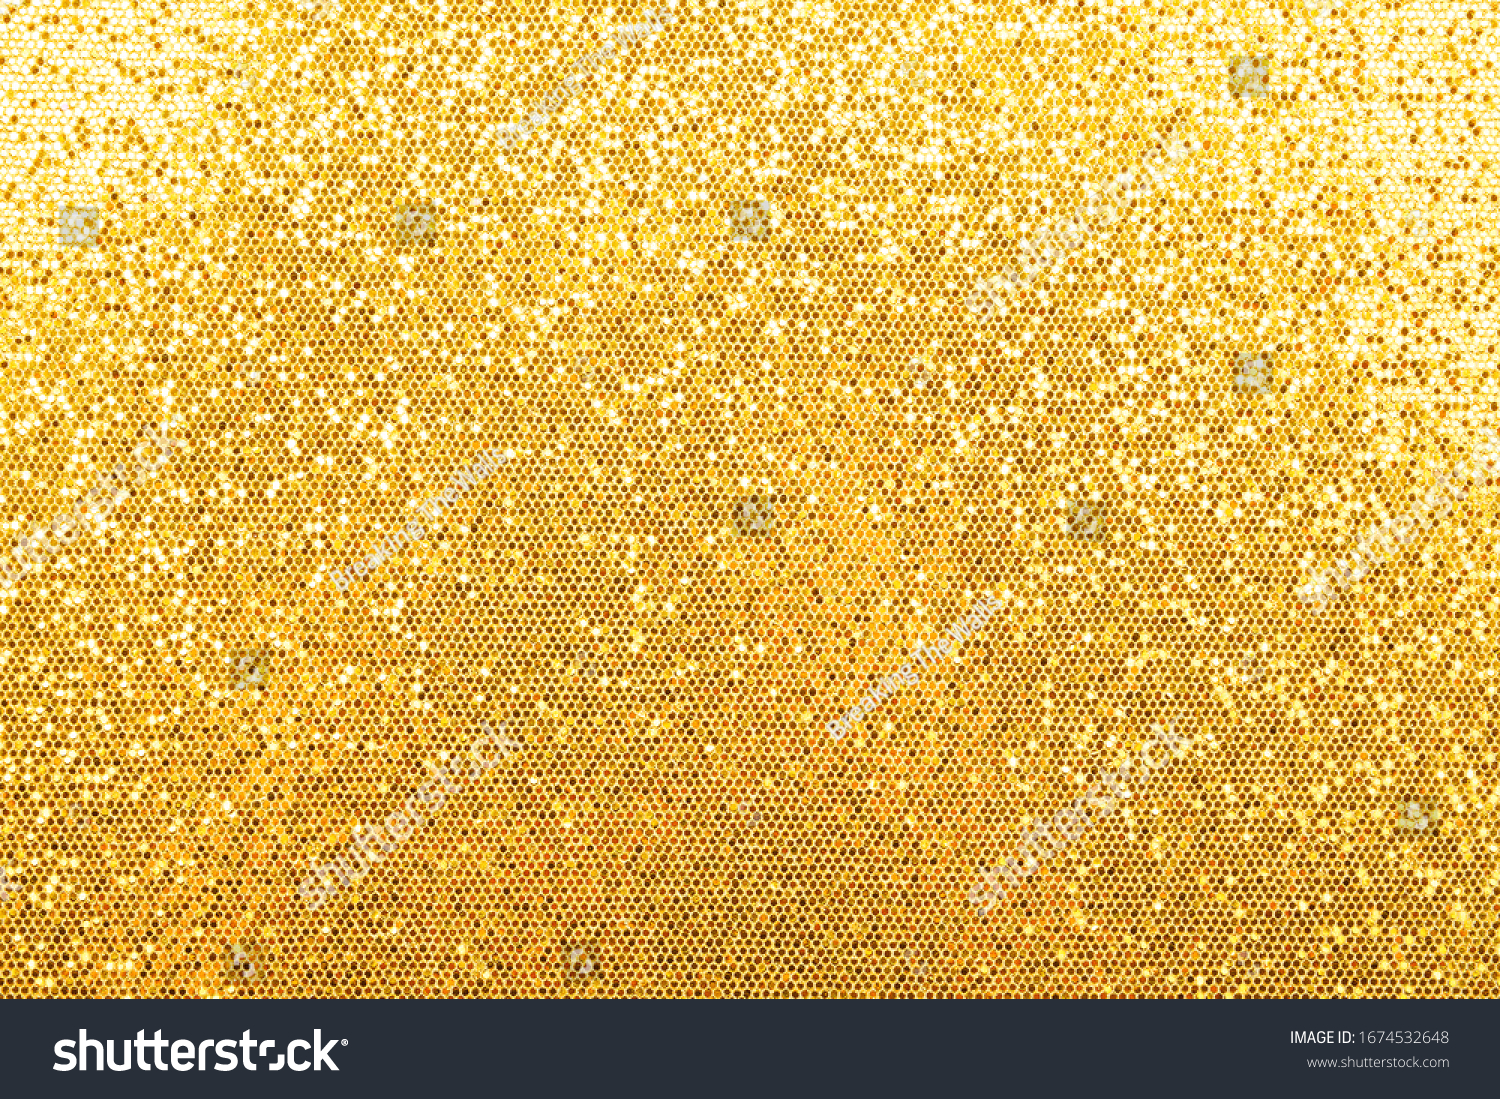 Abstract background texture of shiny golden glitter pattern light gradient #1674532648